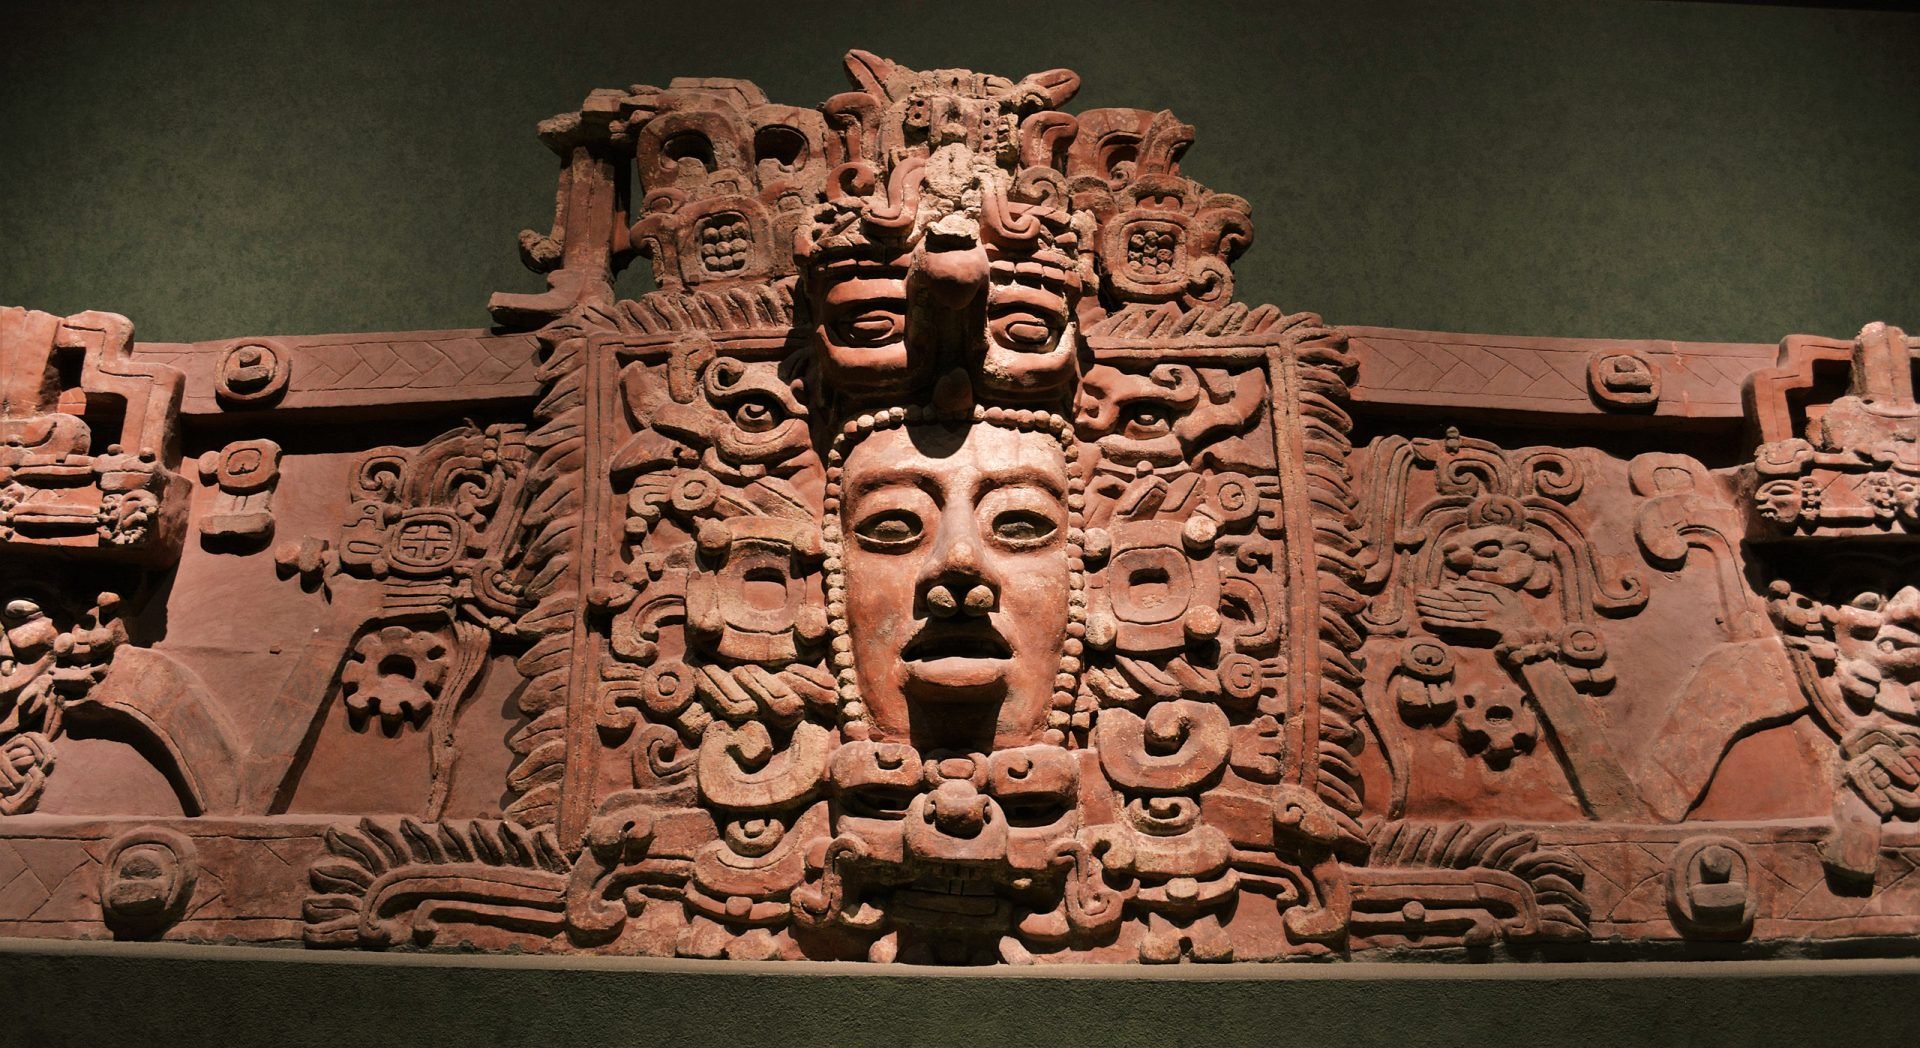 A photo of an ancient Maya temple decoration stone sculpture of a face with intricate details and patterns. The sculpture is in a museum setting with a green background.